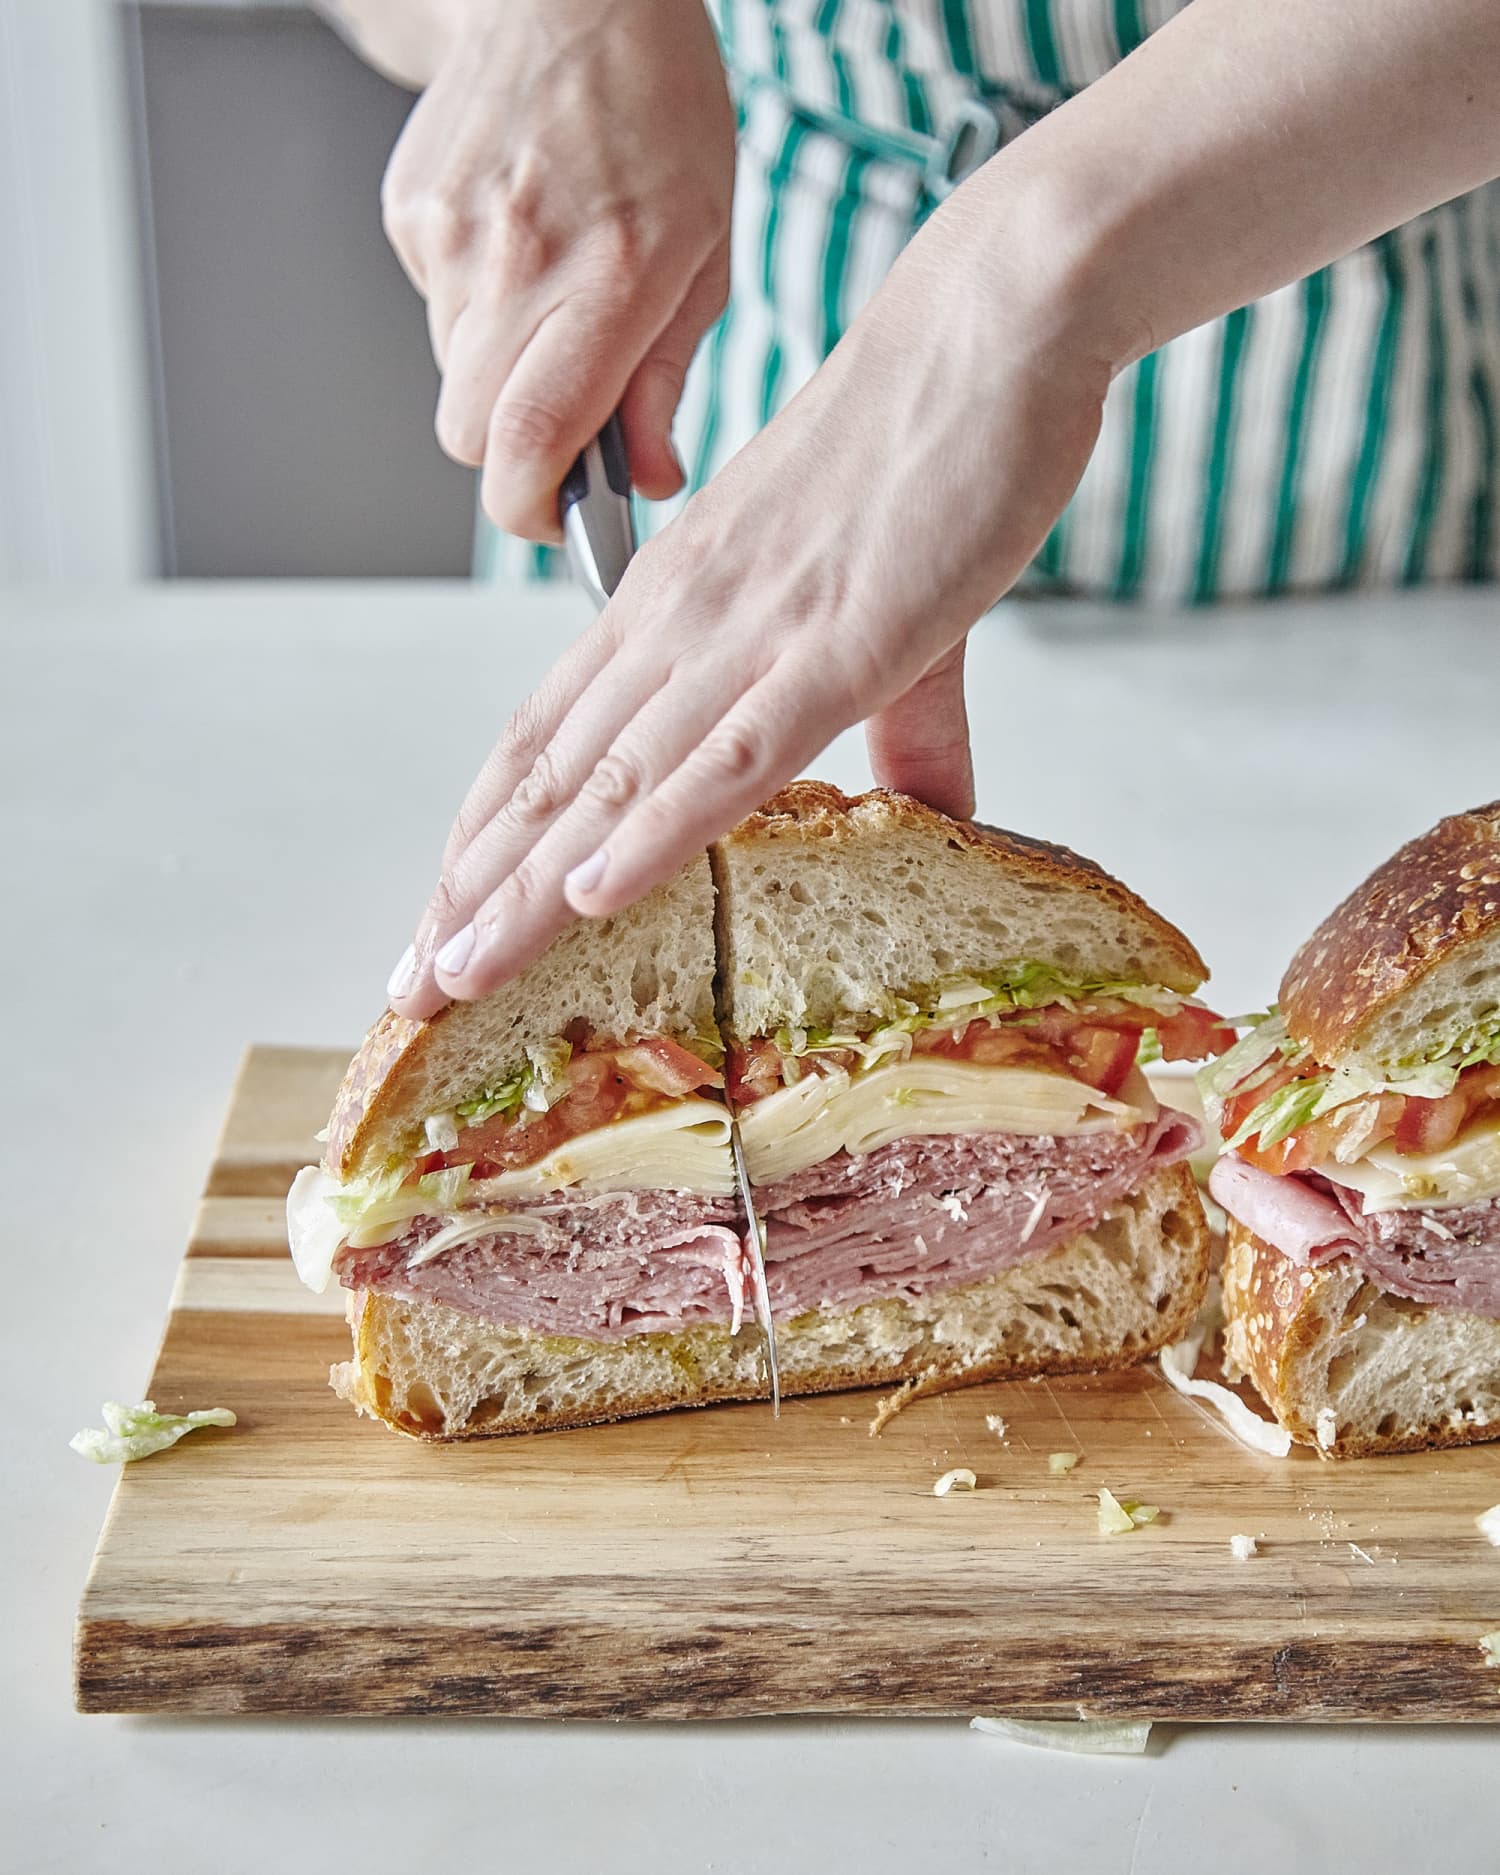 25 Hearty Sandwiches to Make for Dinner